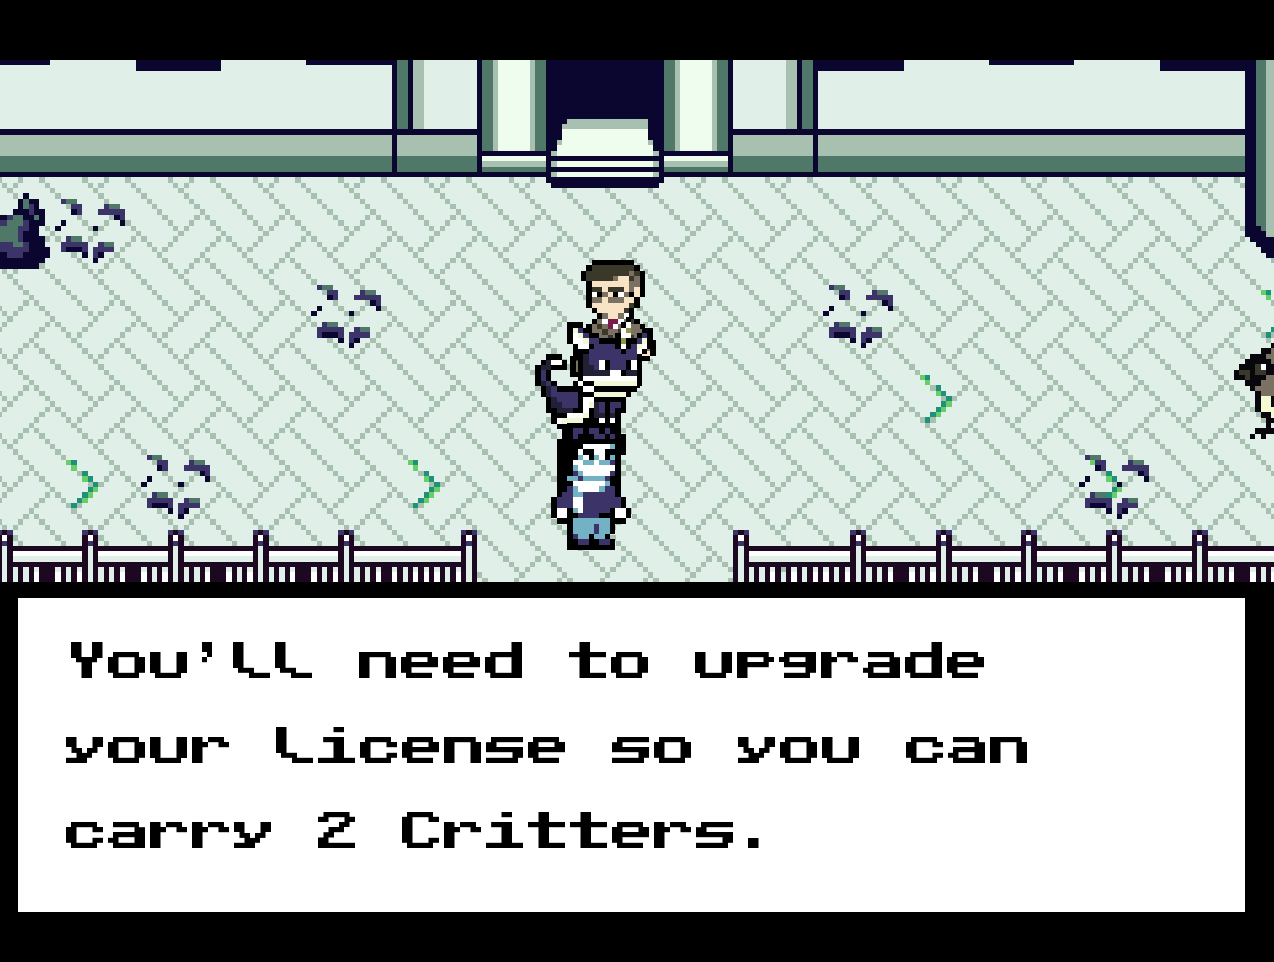 Dr. Oryx tells you that you need to get a license to hold 2 critters.